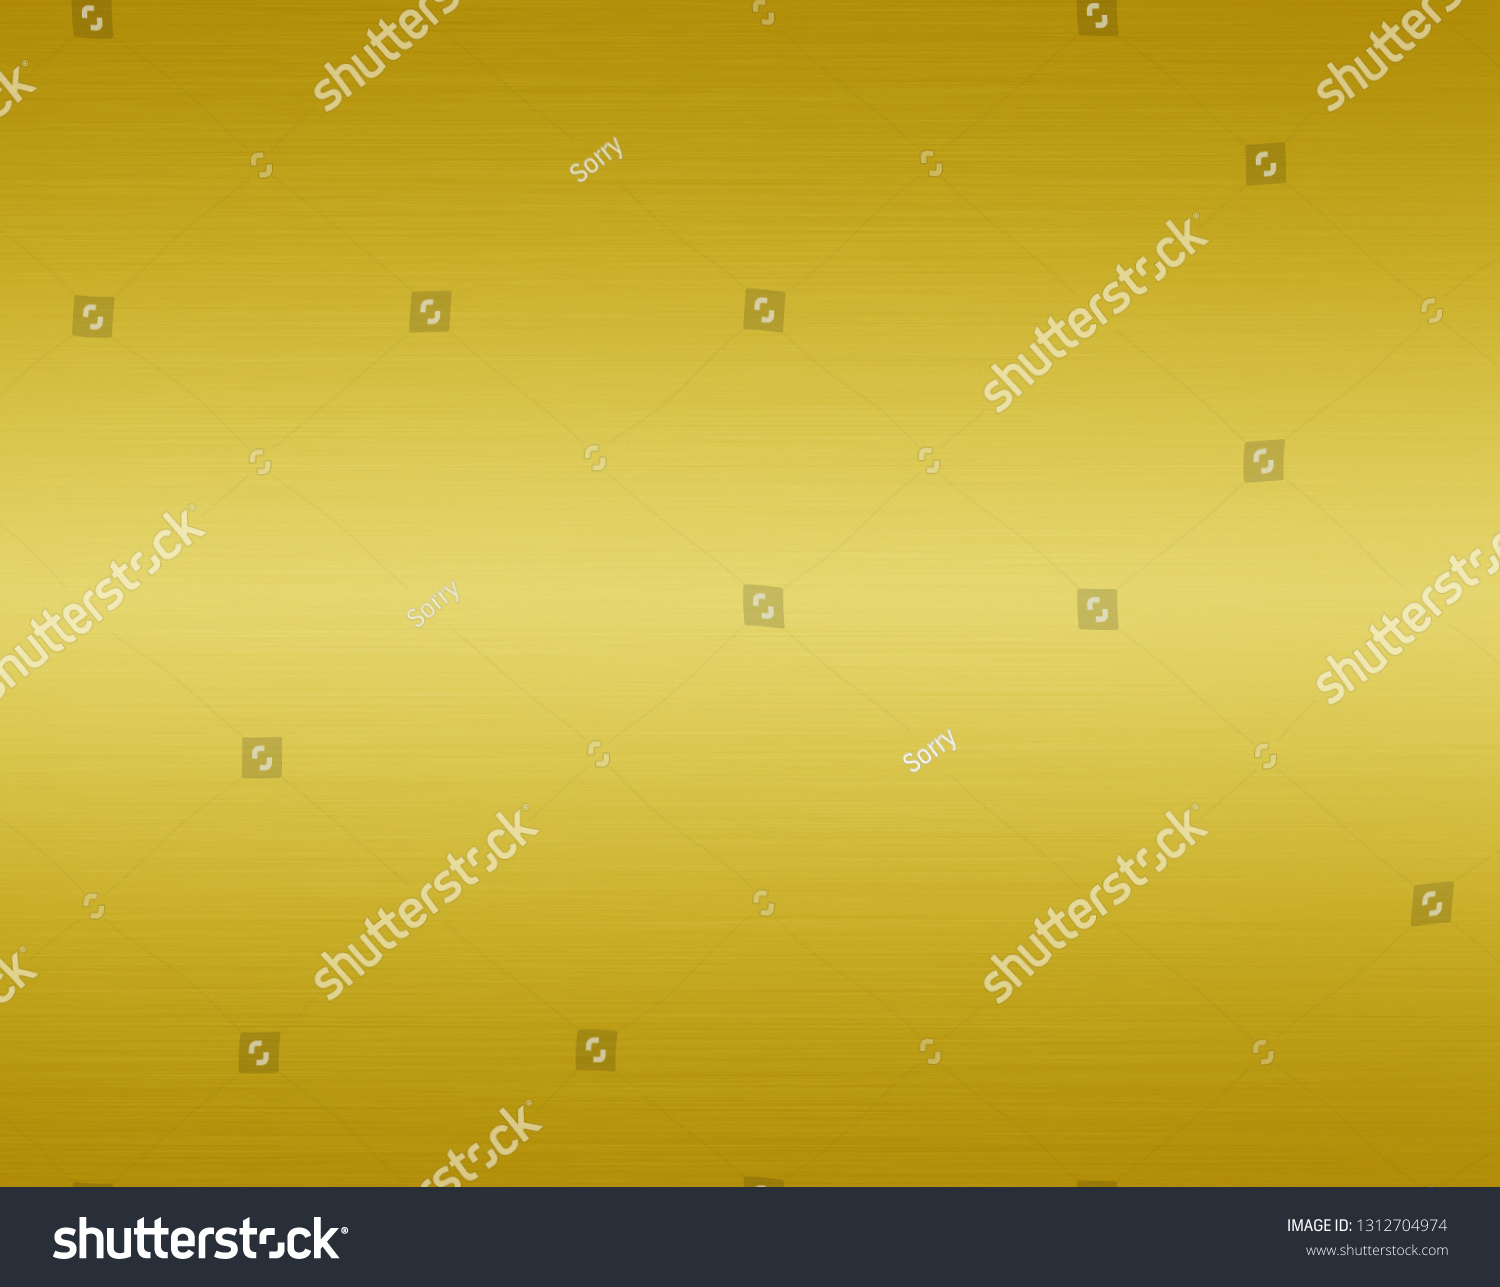 Gold metal texture background #1312704974